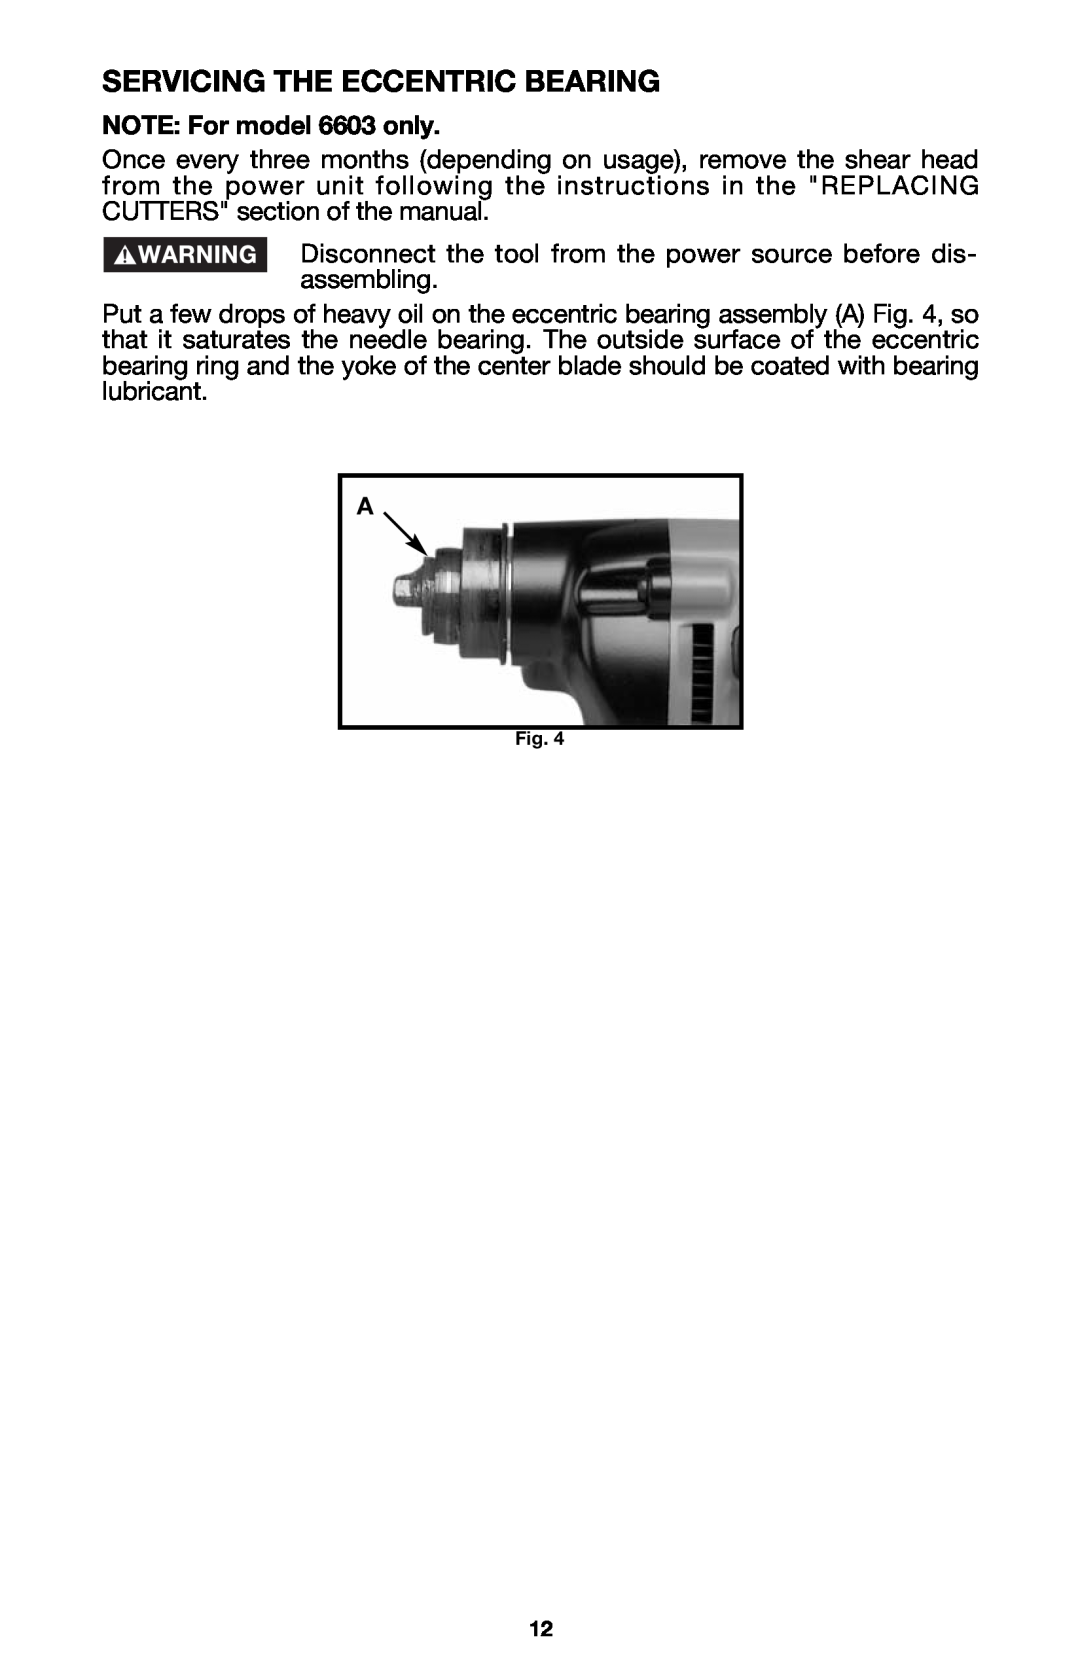 Porter-Cable instruction manual Servicing The Eccentric Bearing, NOTE For model 6603 only 